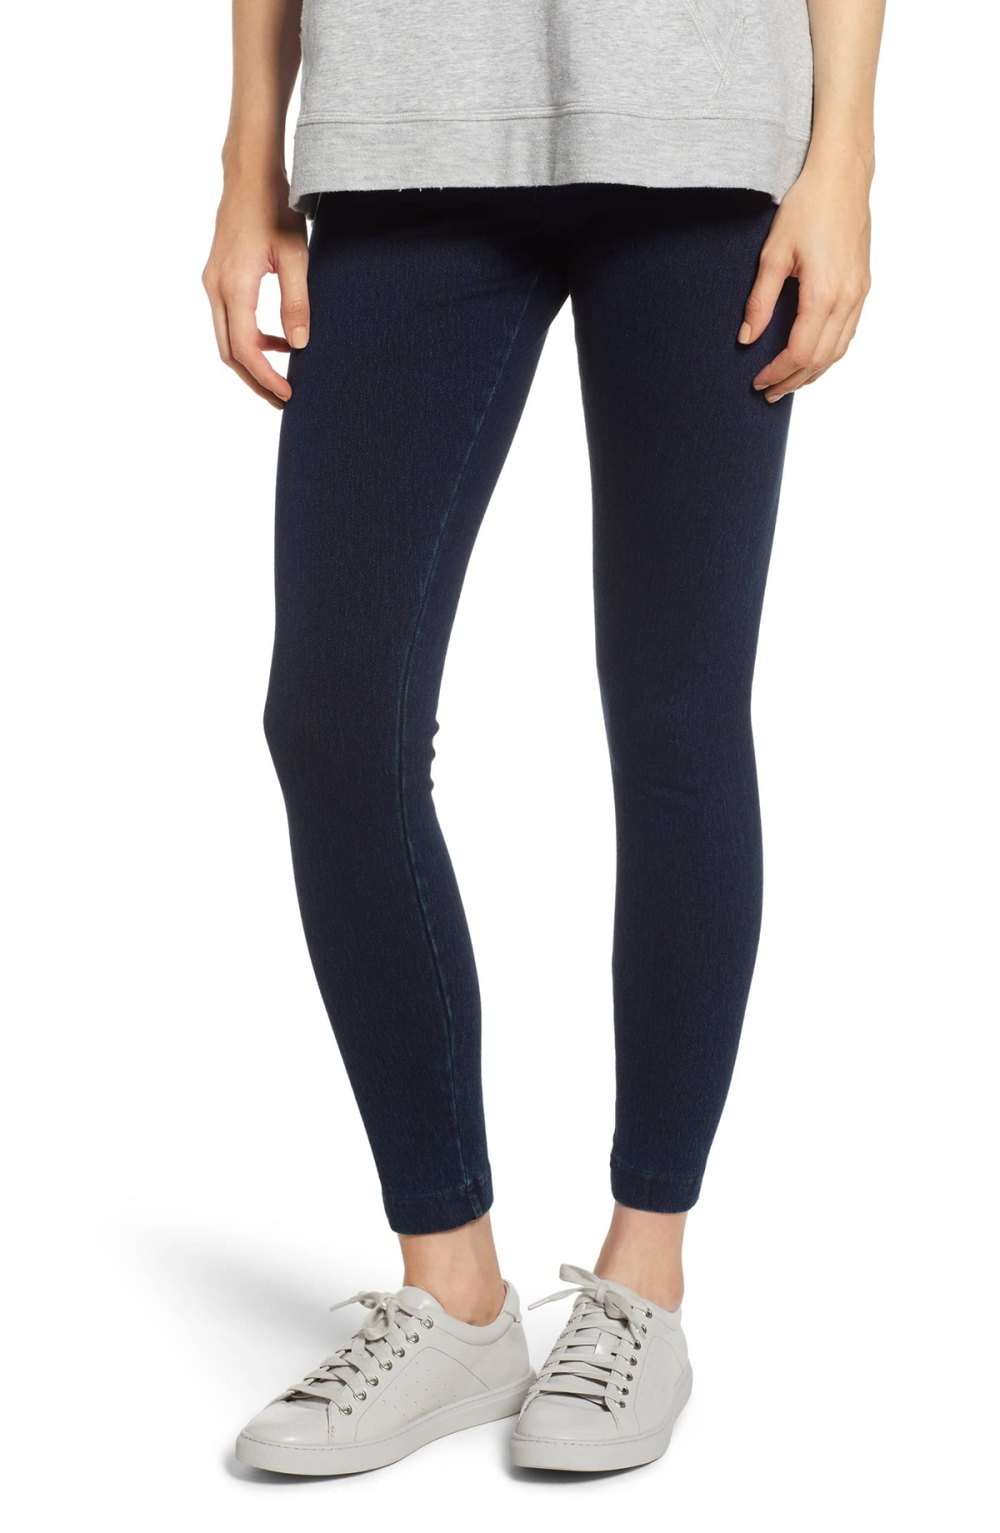 Shoppers Are Saying These Leggings Are Classier Than Real Jeans